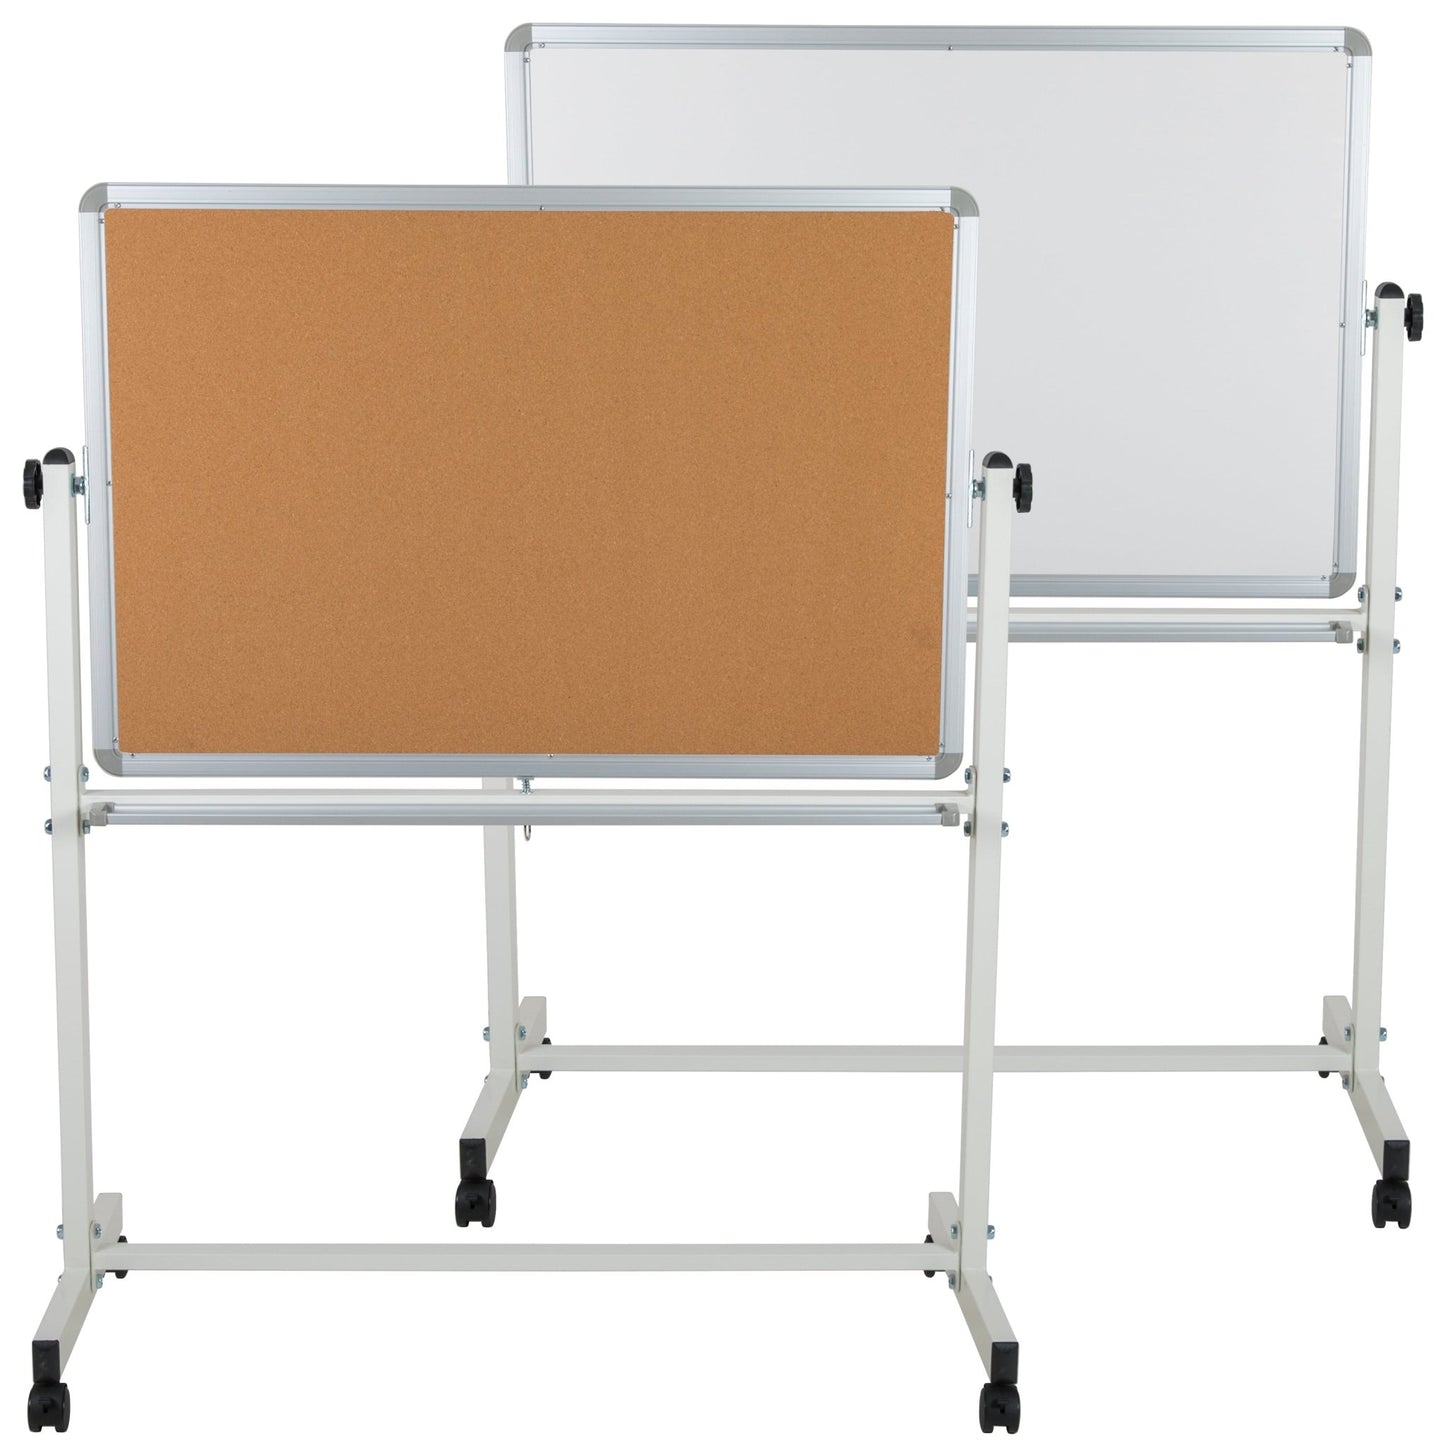 HERCULES Series 45.25"W x 54.75"H Reversible Mobile Cork Bulletin Board and White Board with Pen Tray - SchoolOutlet